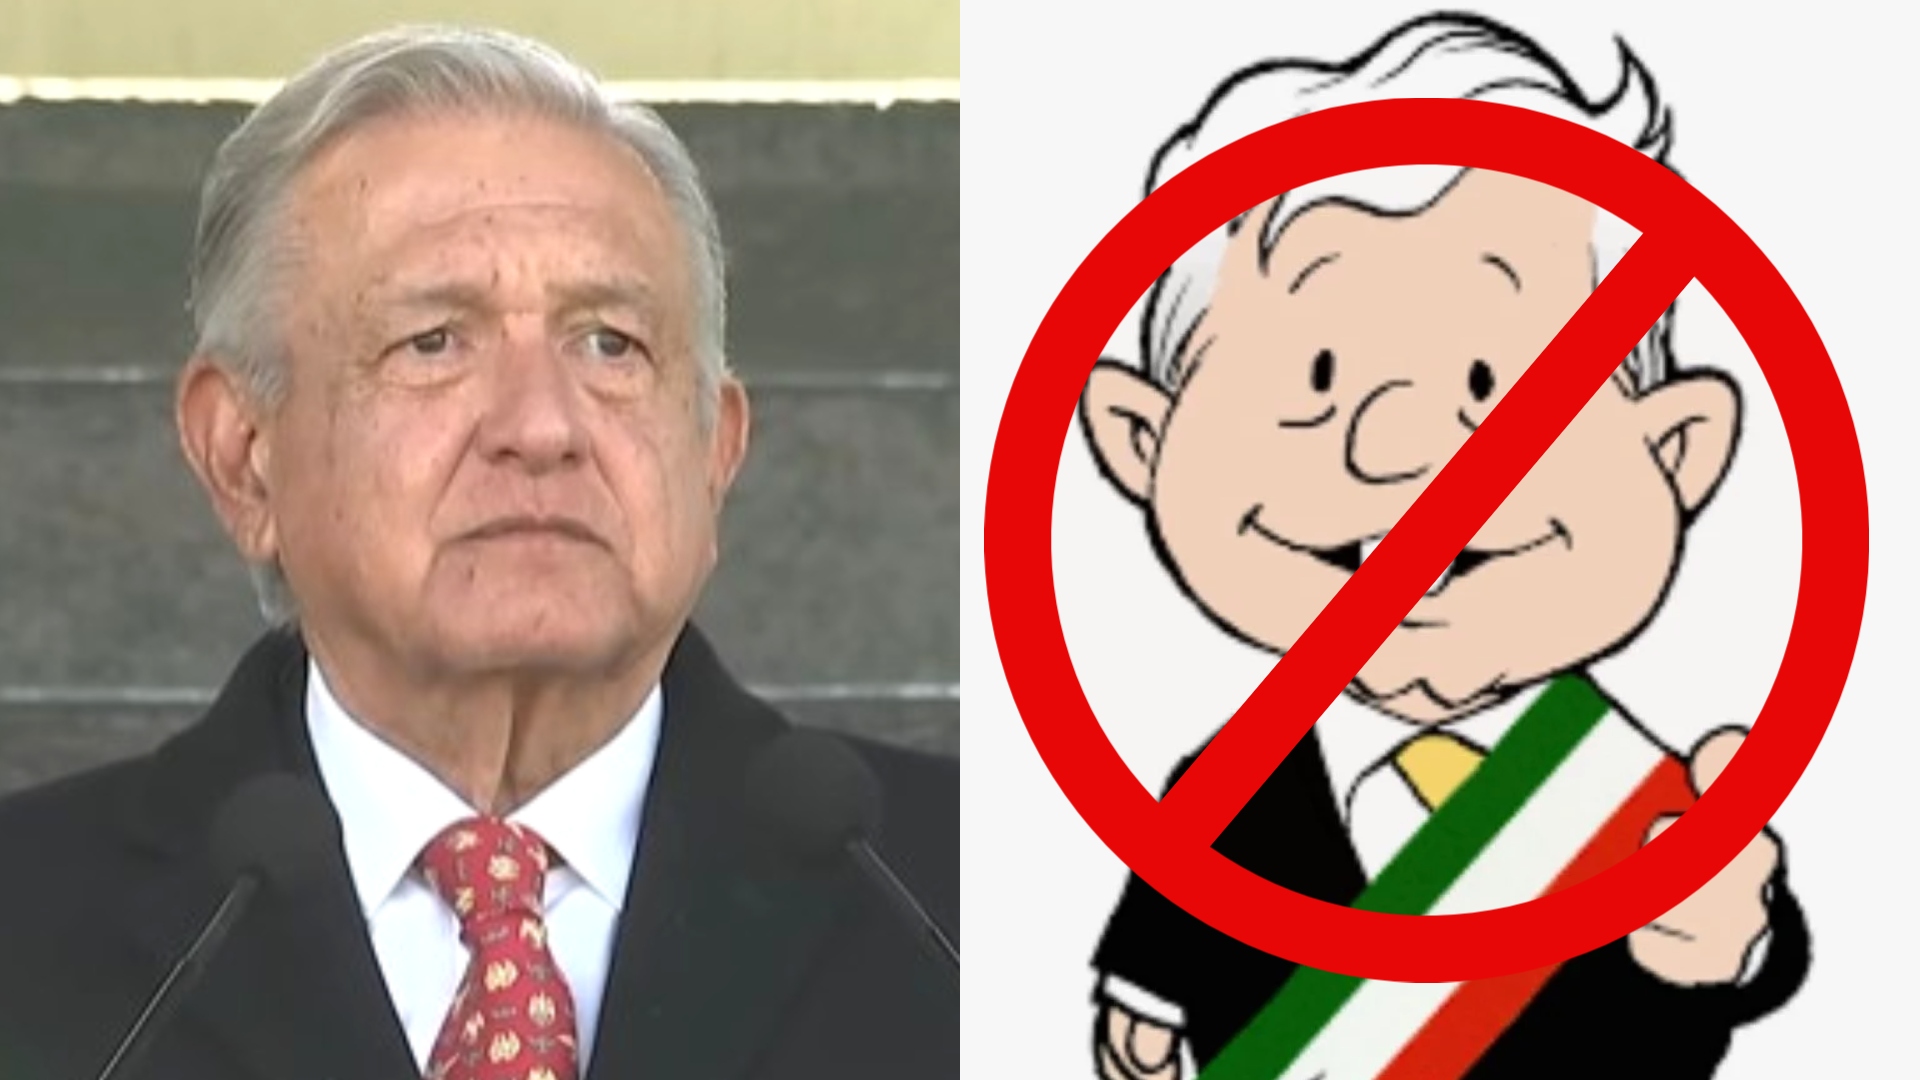 The TEPJF prohibited the use of the cartoon made by Monero Hernández (special)